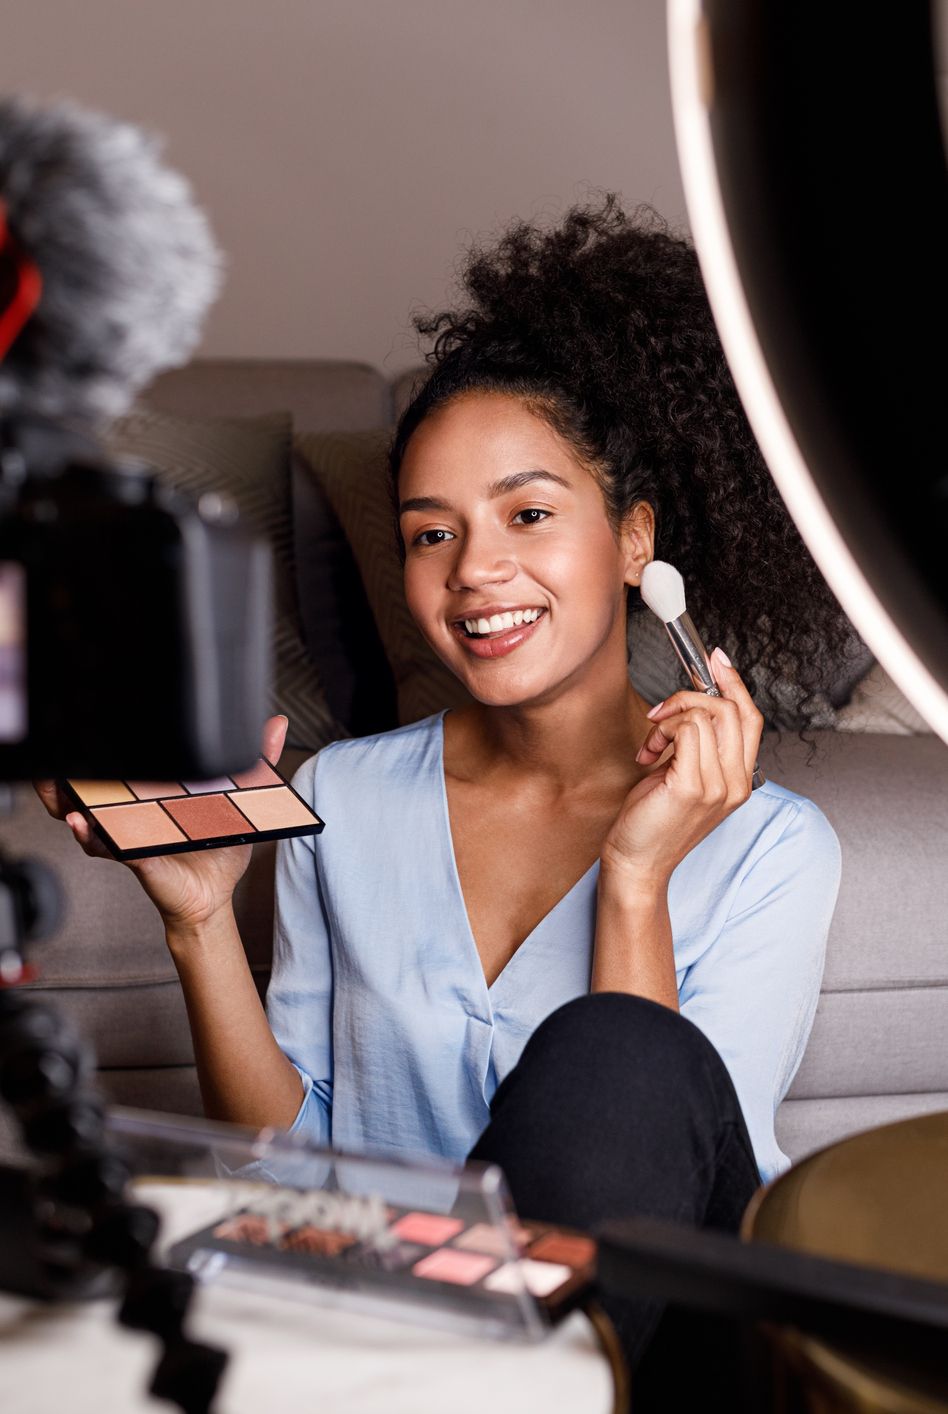 smiling young woman applying make up while being filmed in camera